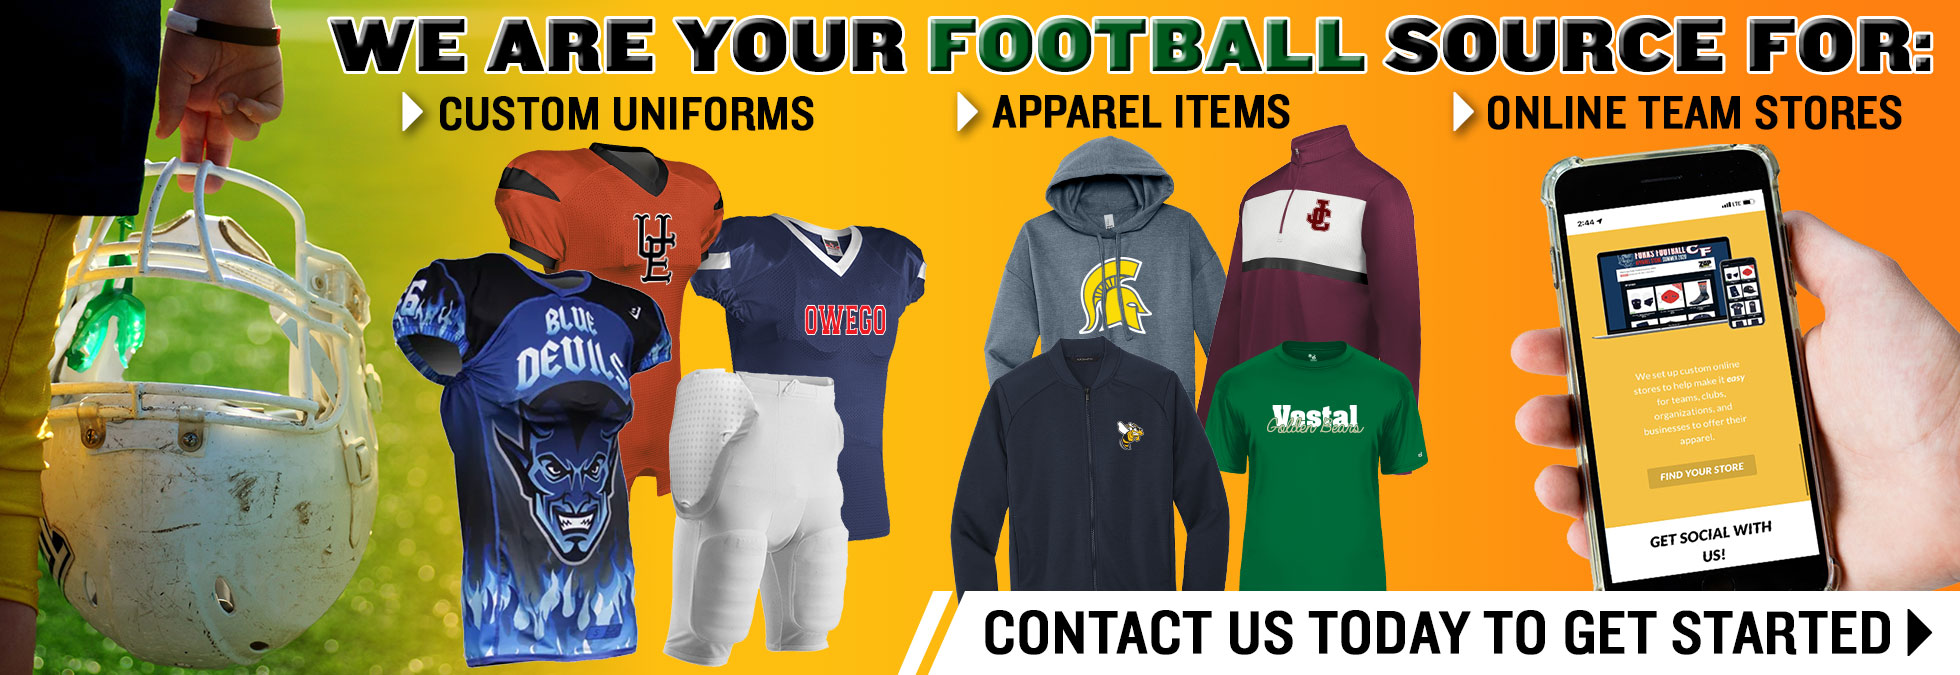 Zappia is your Football Source